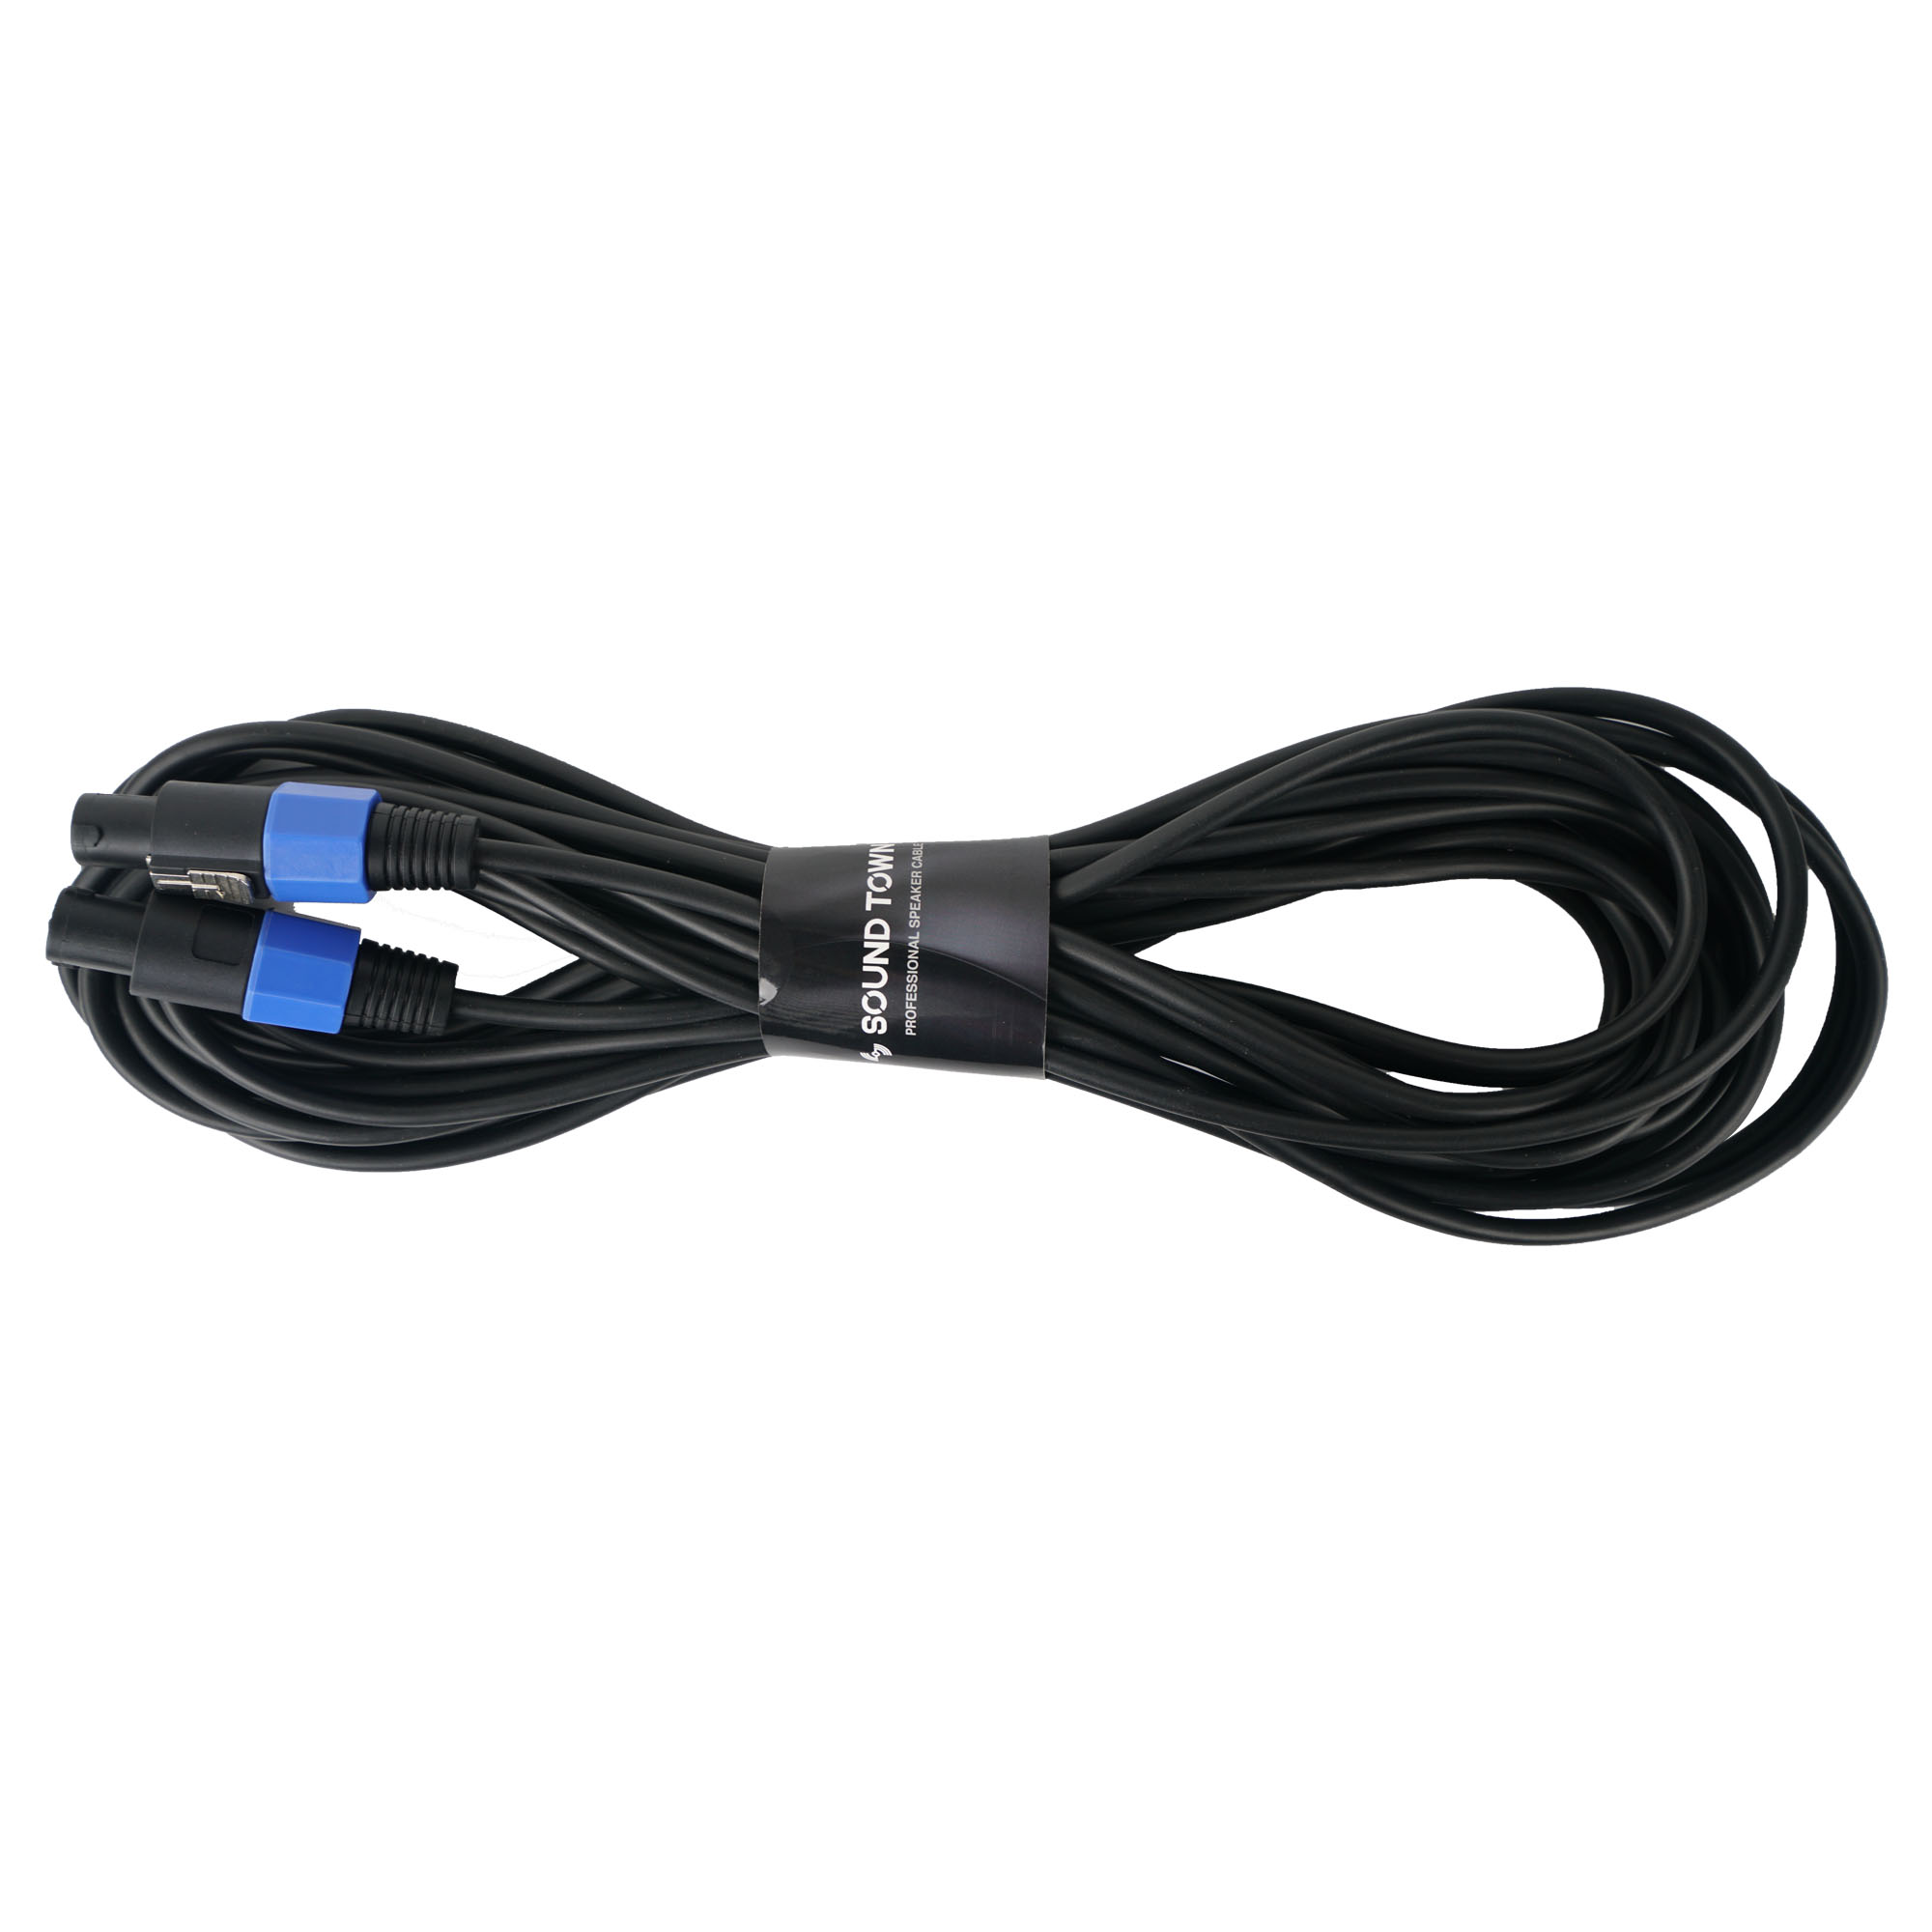 Sound Town Speakon to Speakon Speaker Cable, 50 Feet, 12 Gauge, 2 Conductor, Male to Male (STC-12NN50) - image 1 of 2